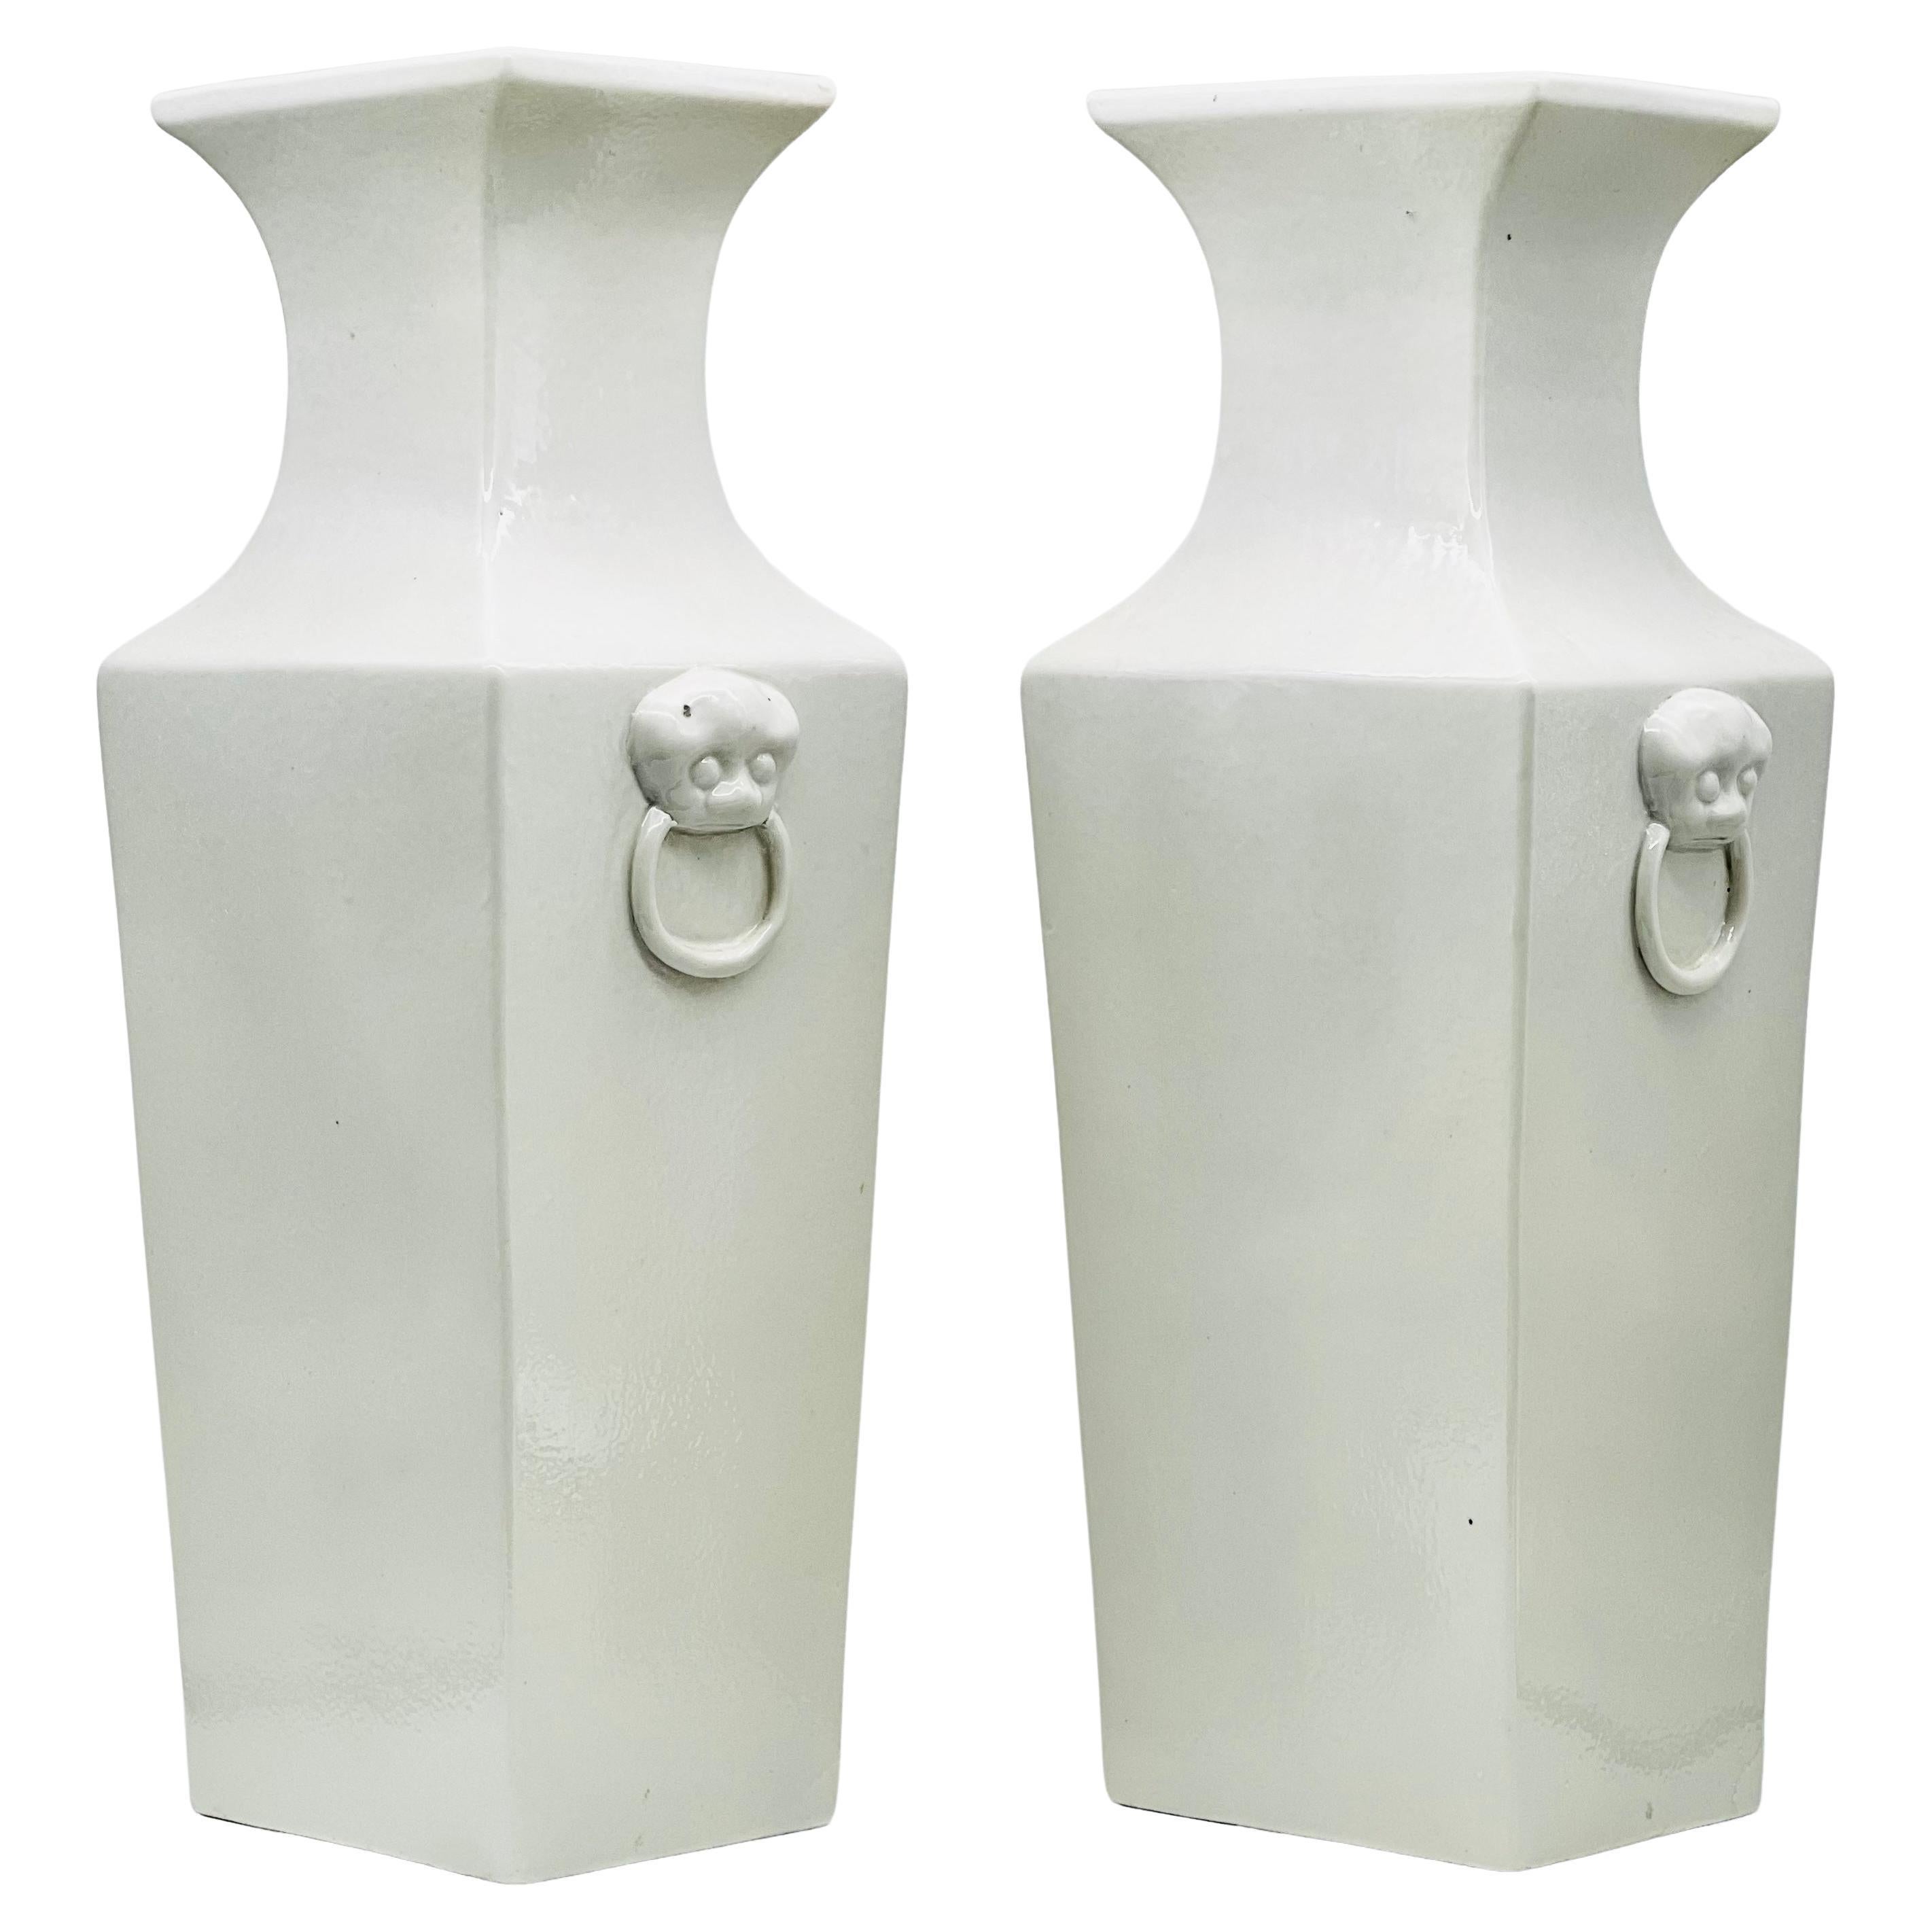 Large Pair of Chinese Blanc De Chine Vases, Republic Period, Early 20th C